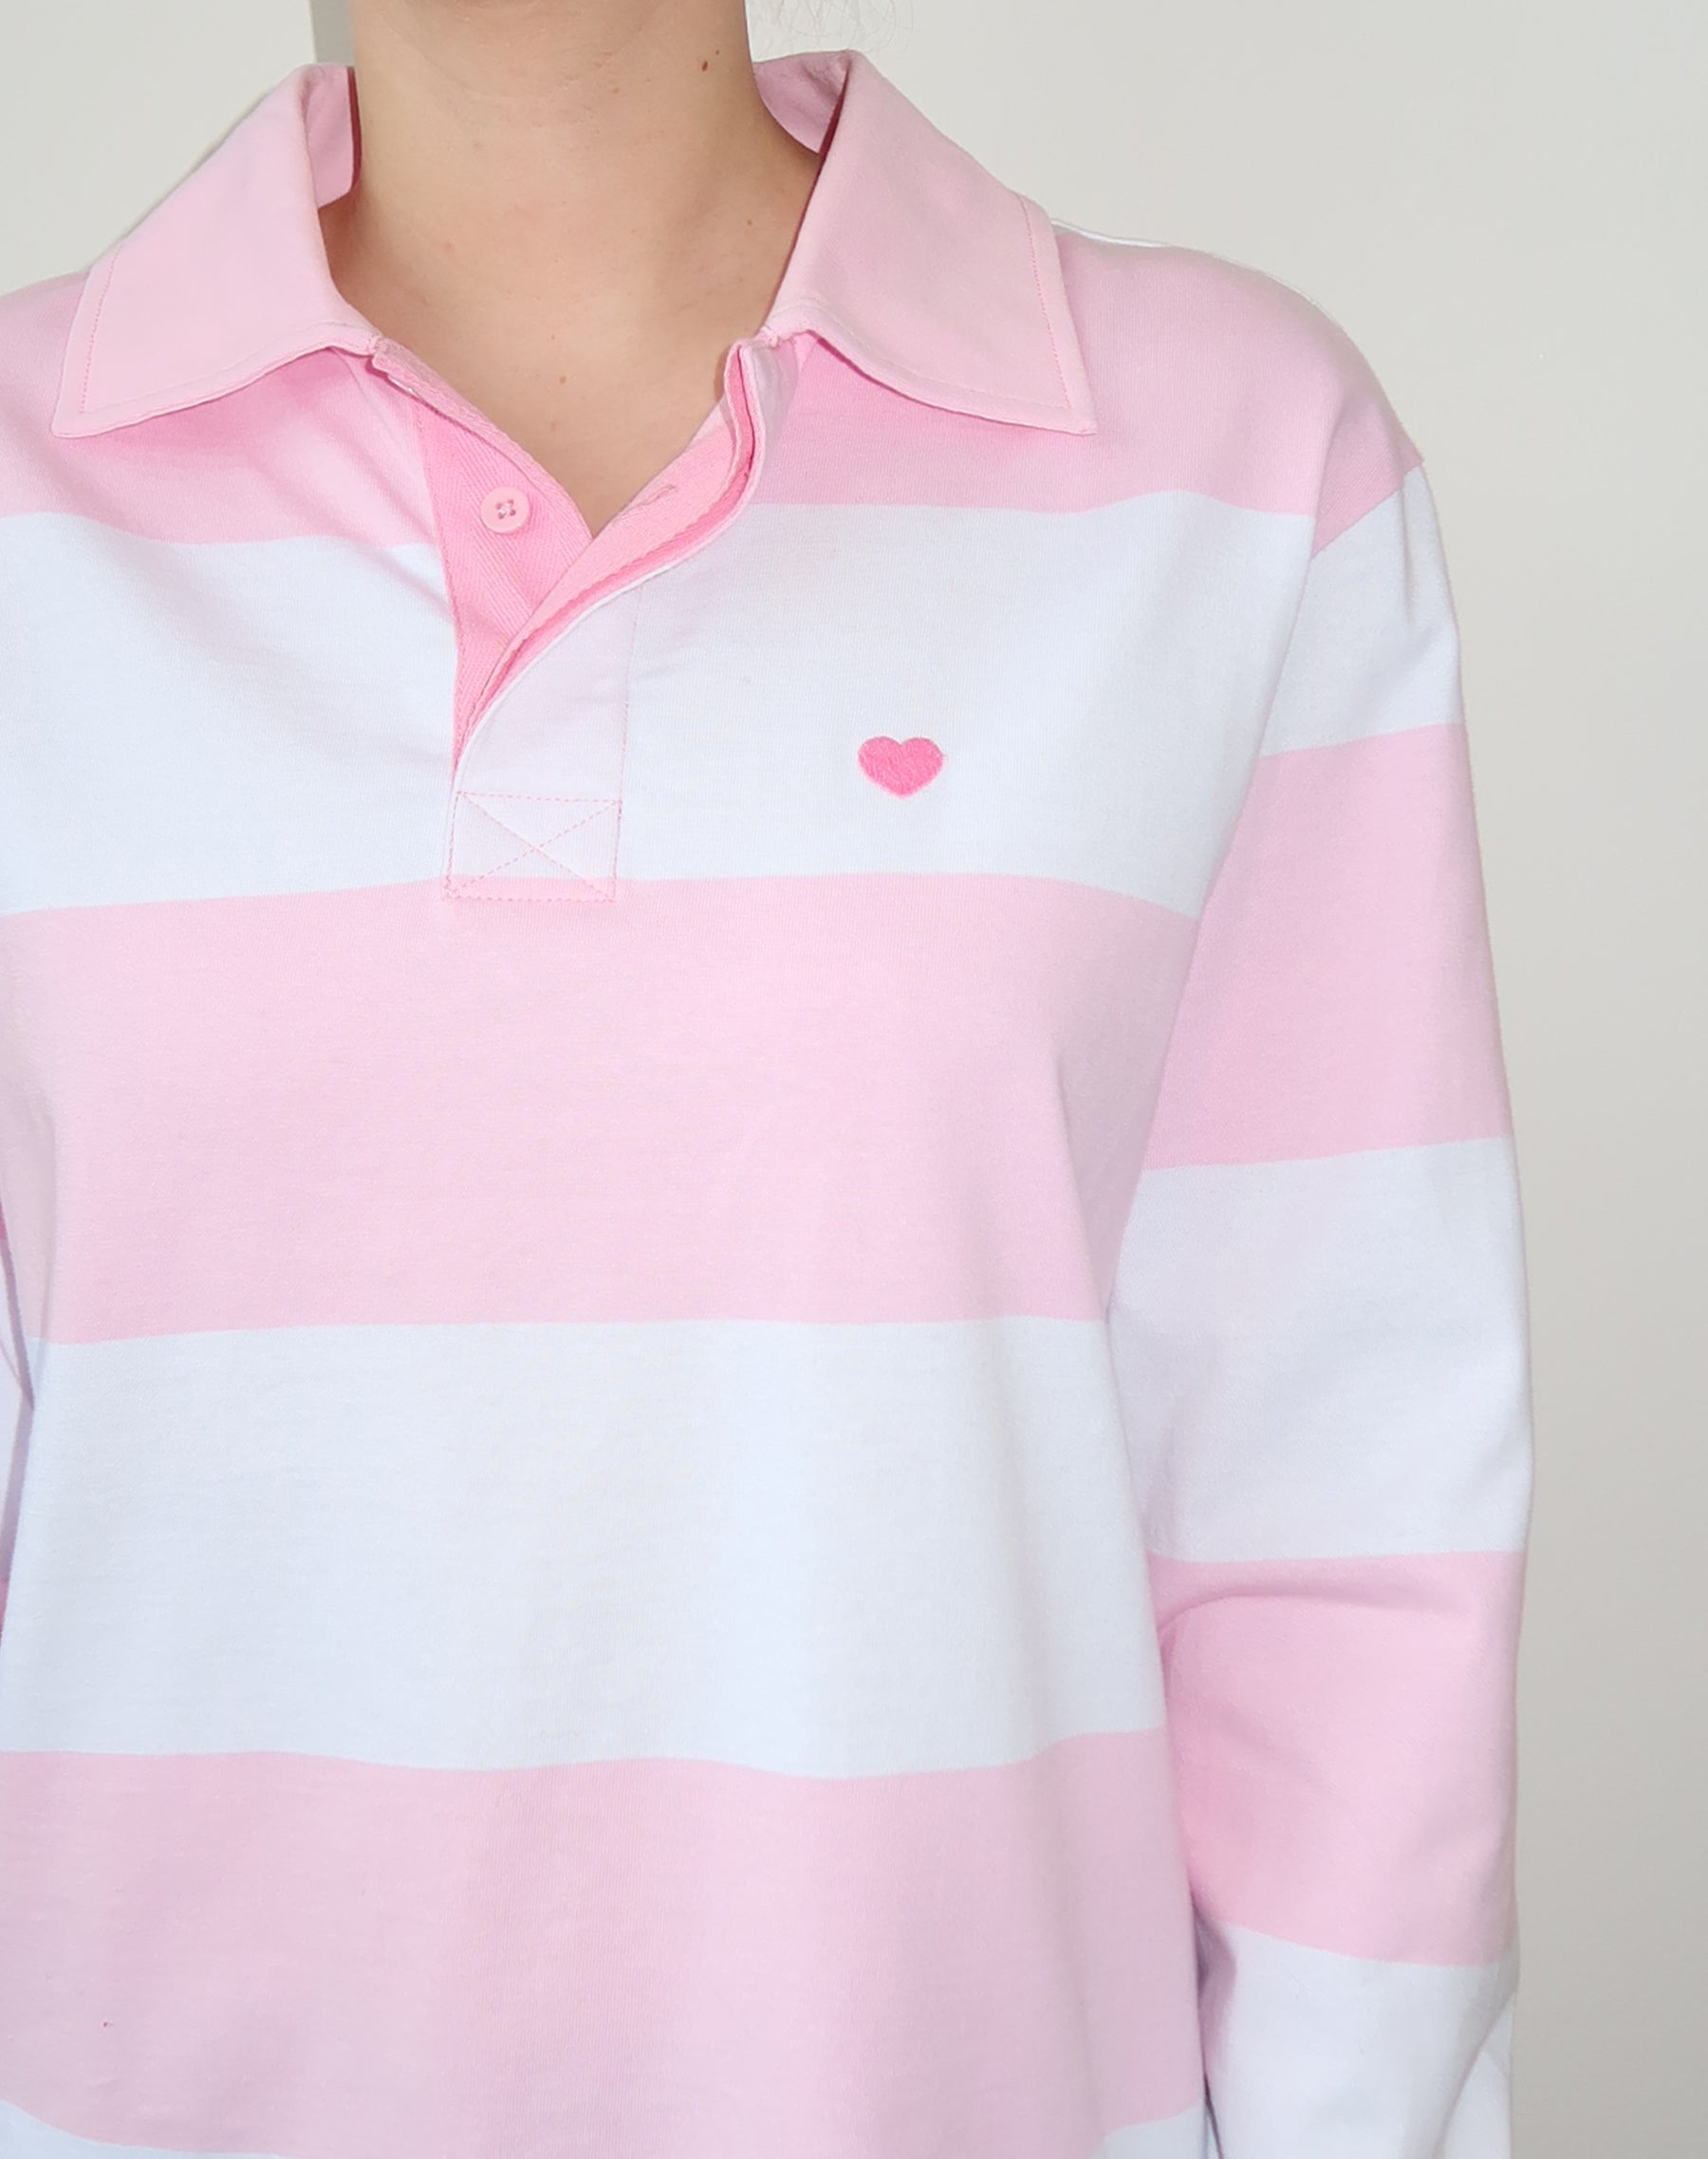 The "HEART" Striped Rugby Shirt | Baby Pink & White